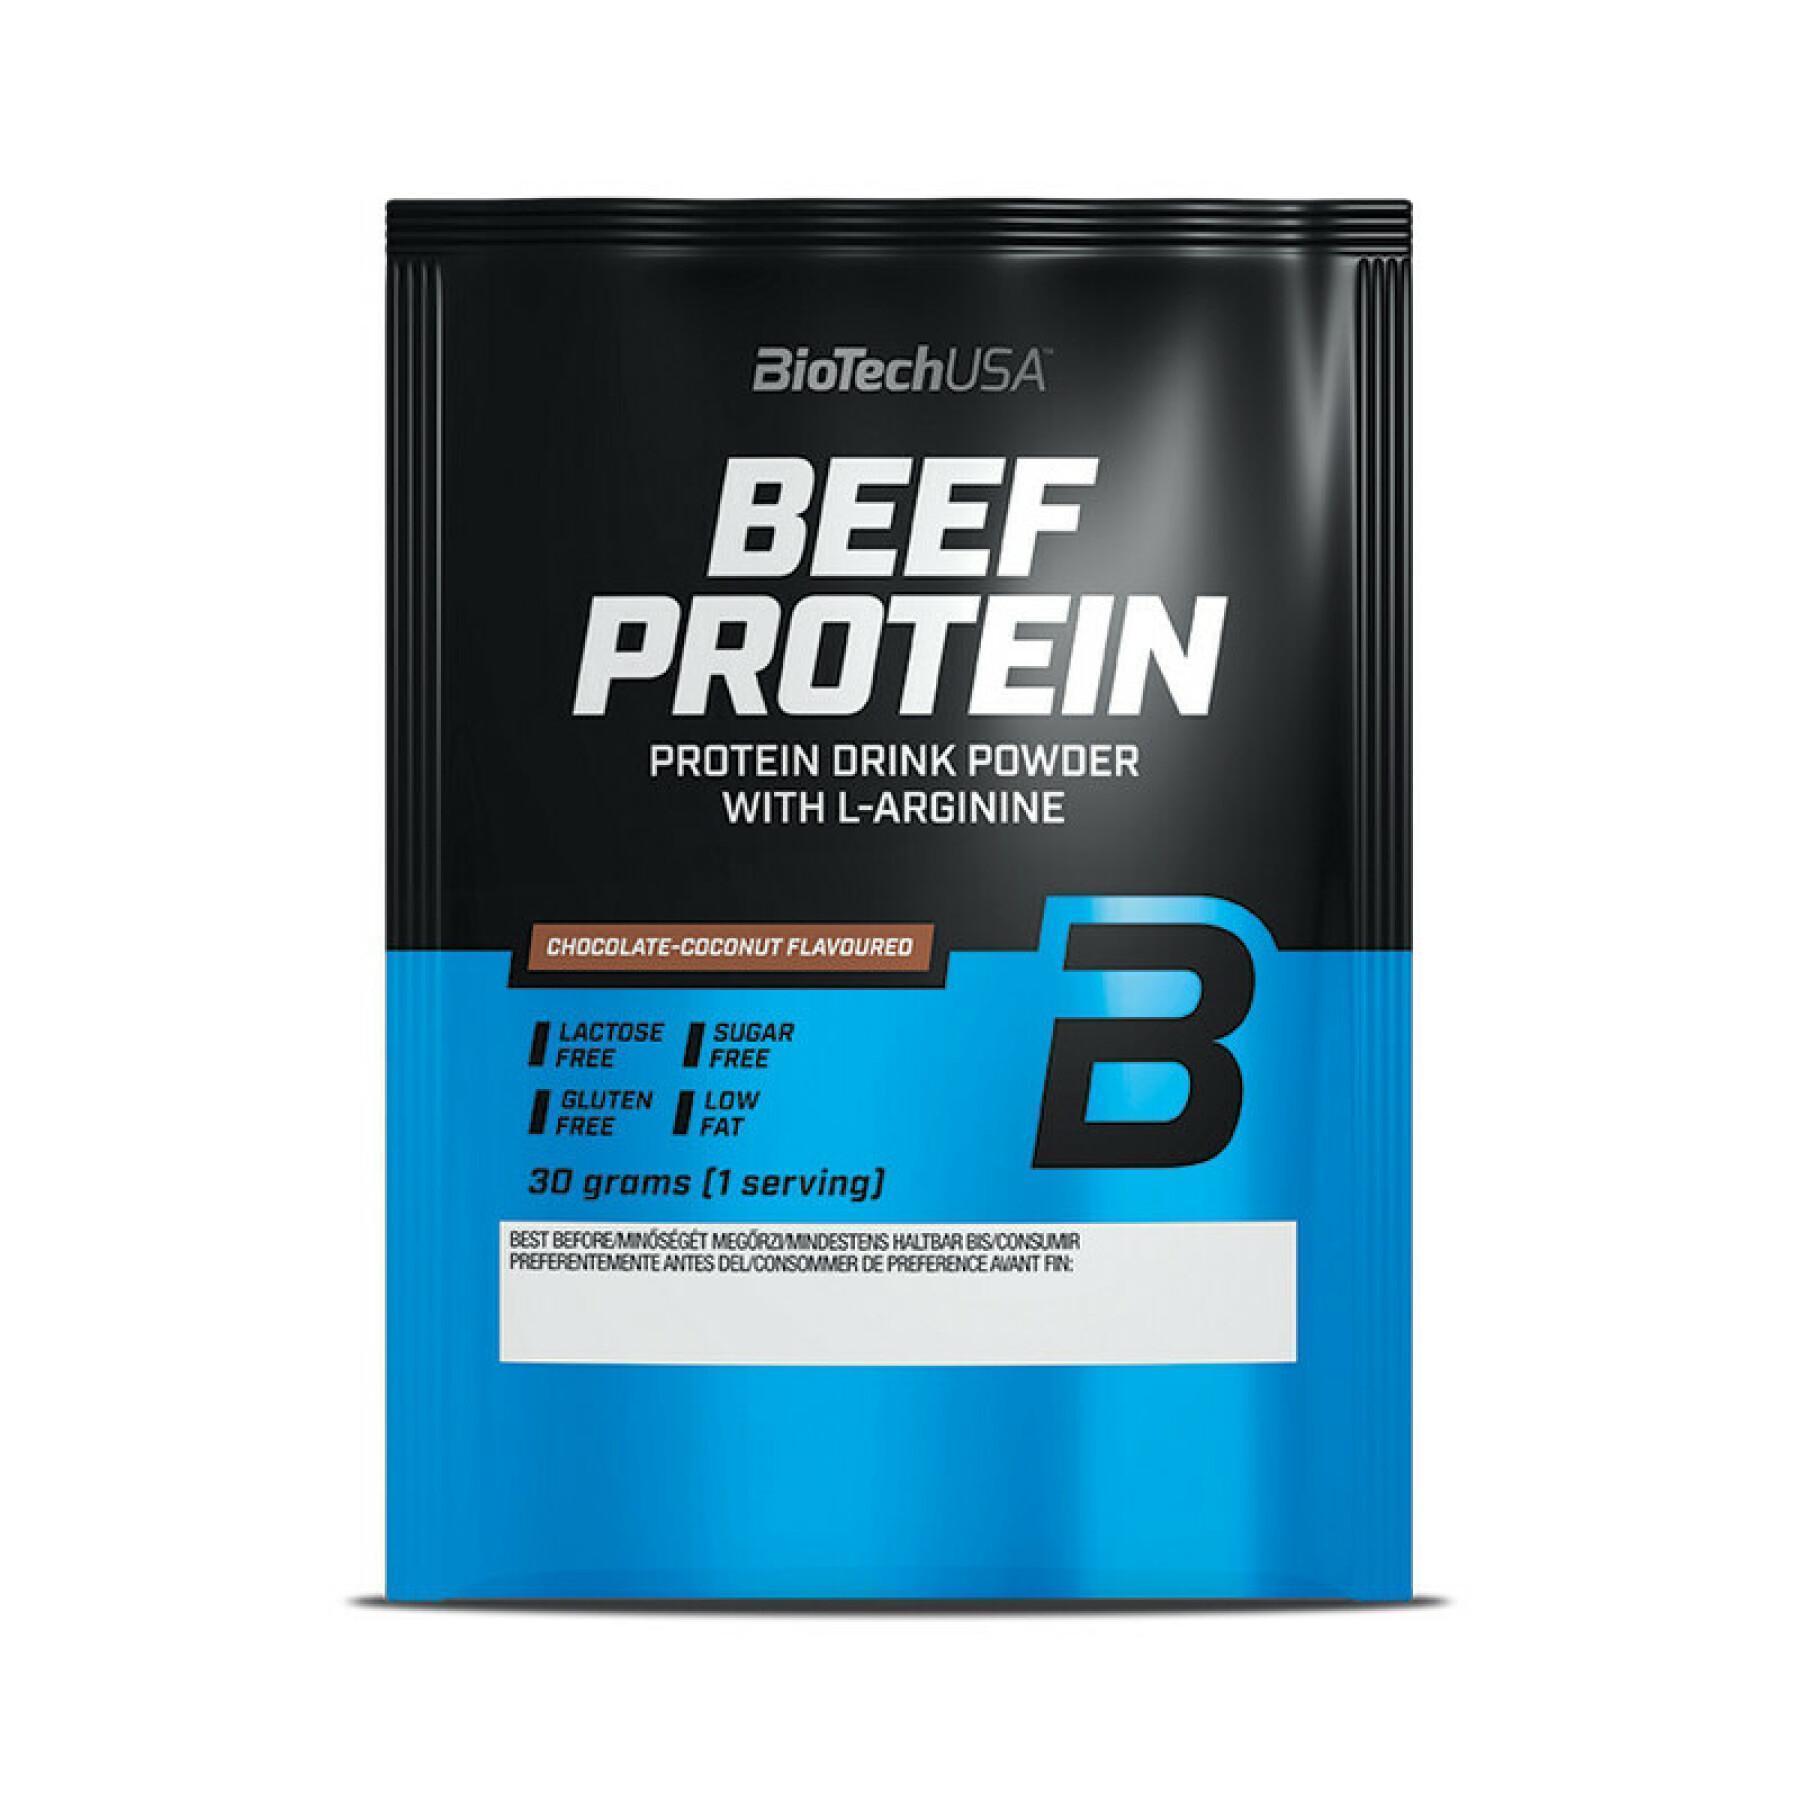 50 jars of beef protein Biotech USA - Fraise - 30g